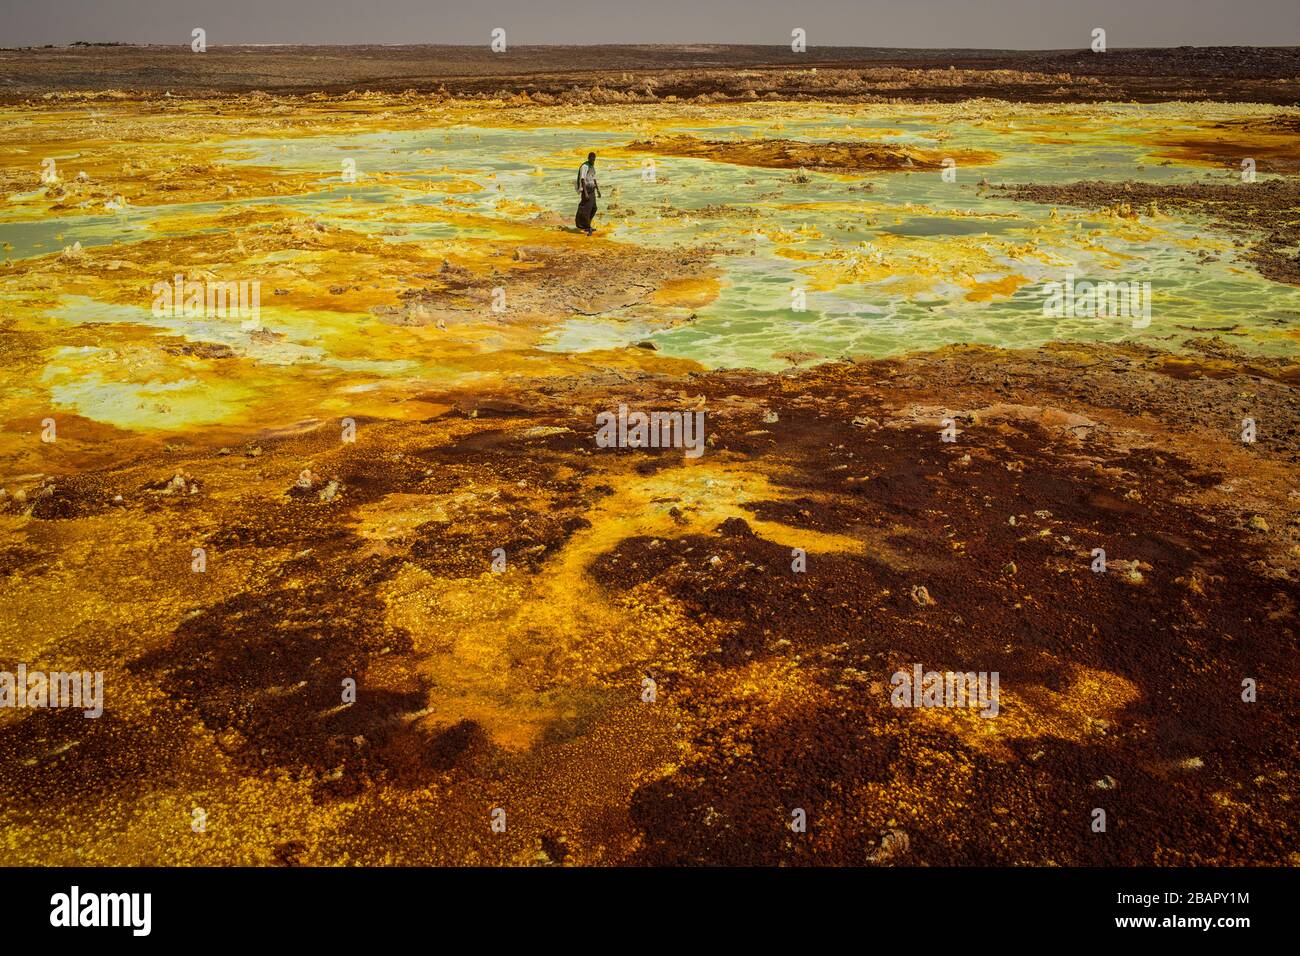 A man walks on sulphur and mineral salt formations near Dallol in the Danakil Depression, northern Ethiopia April 22, 2013. Stock Photo